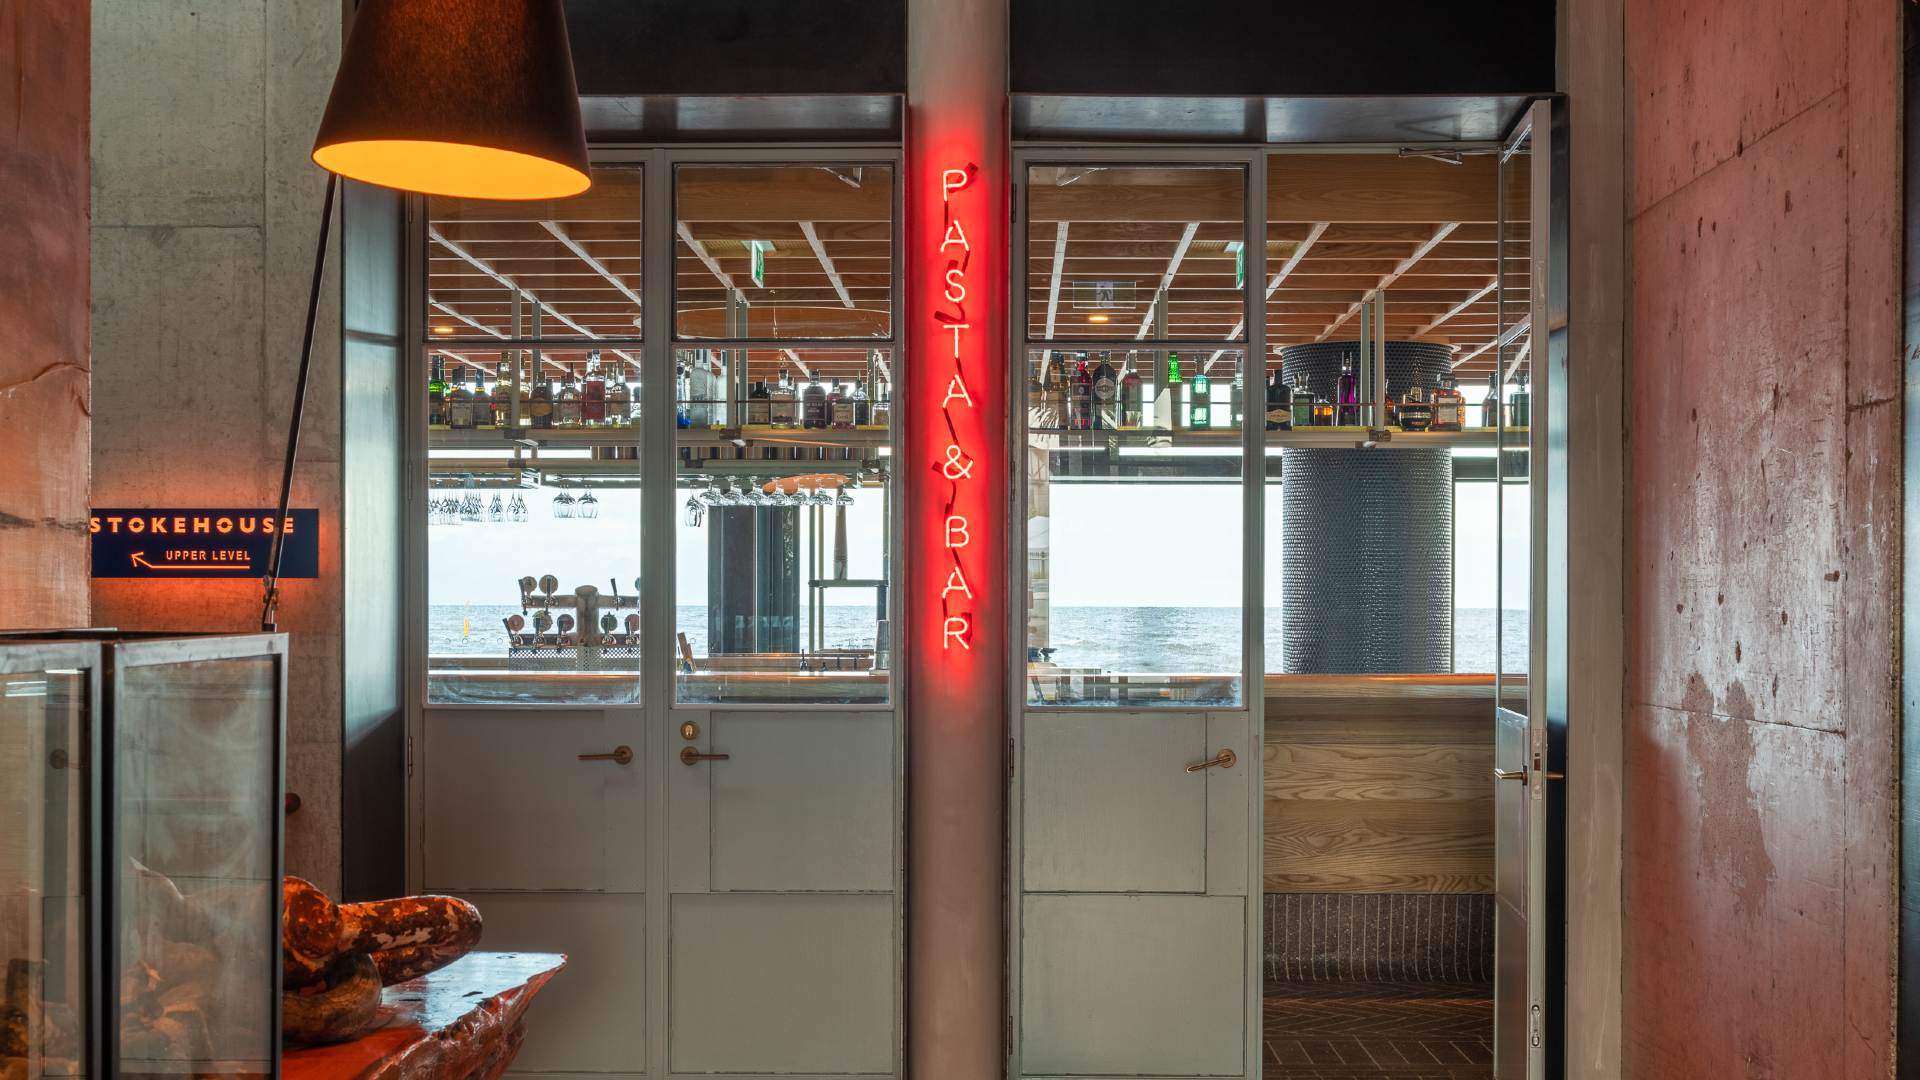 Stokehouse Pasta & Bar Is the New Euro-Accented All-Day Eatery in the Former Pontoon Digs